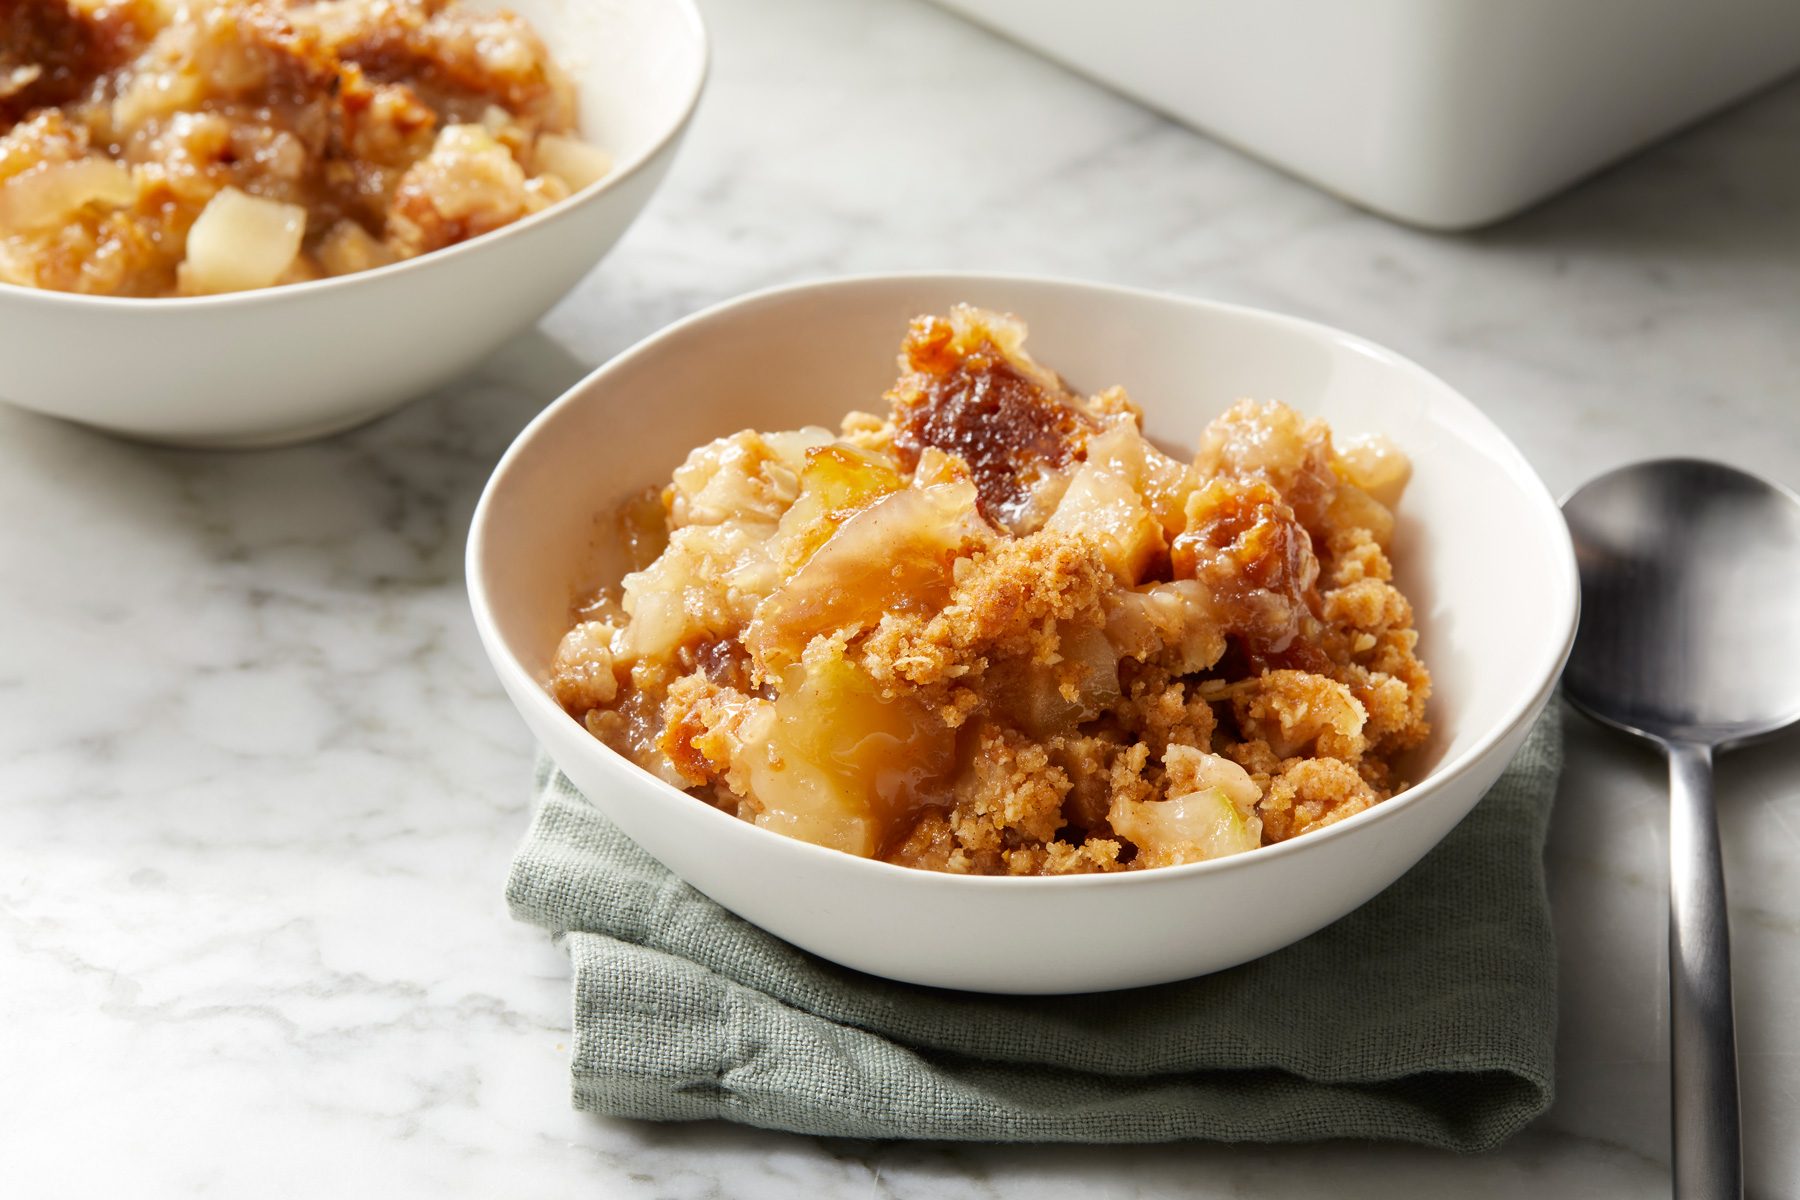 Two bowls of Winning Apple Crisp on a table